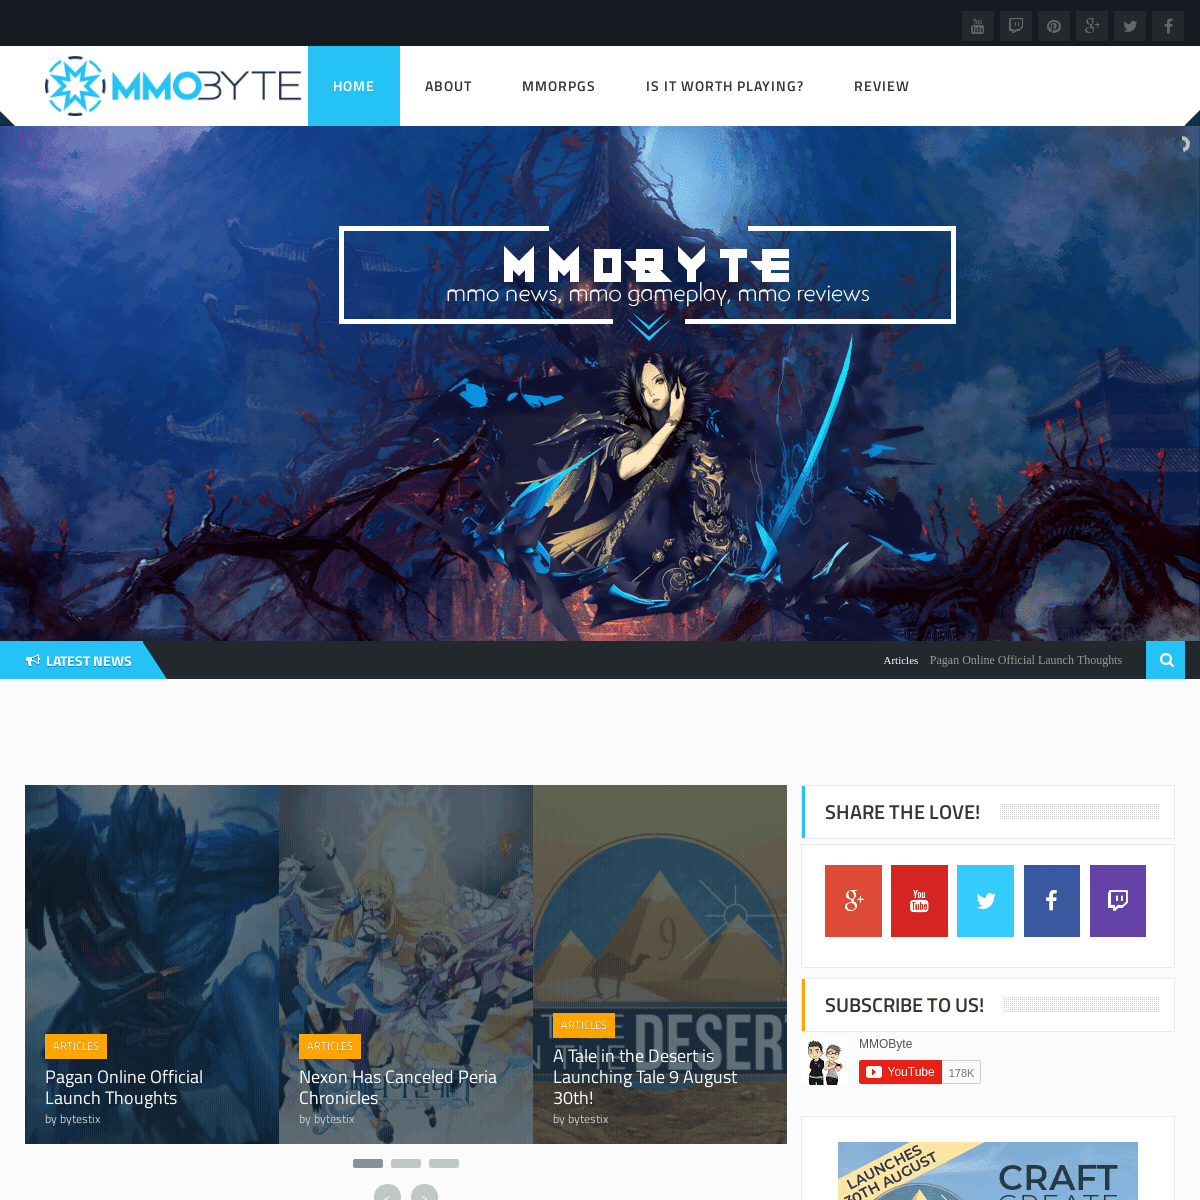 MMOByte: Your #1 MMO Portal - MMORPG News, Reviews, Gameplay